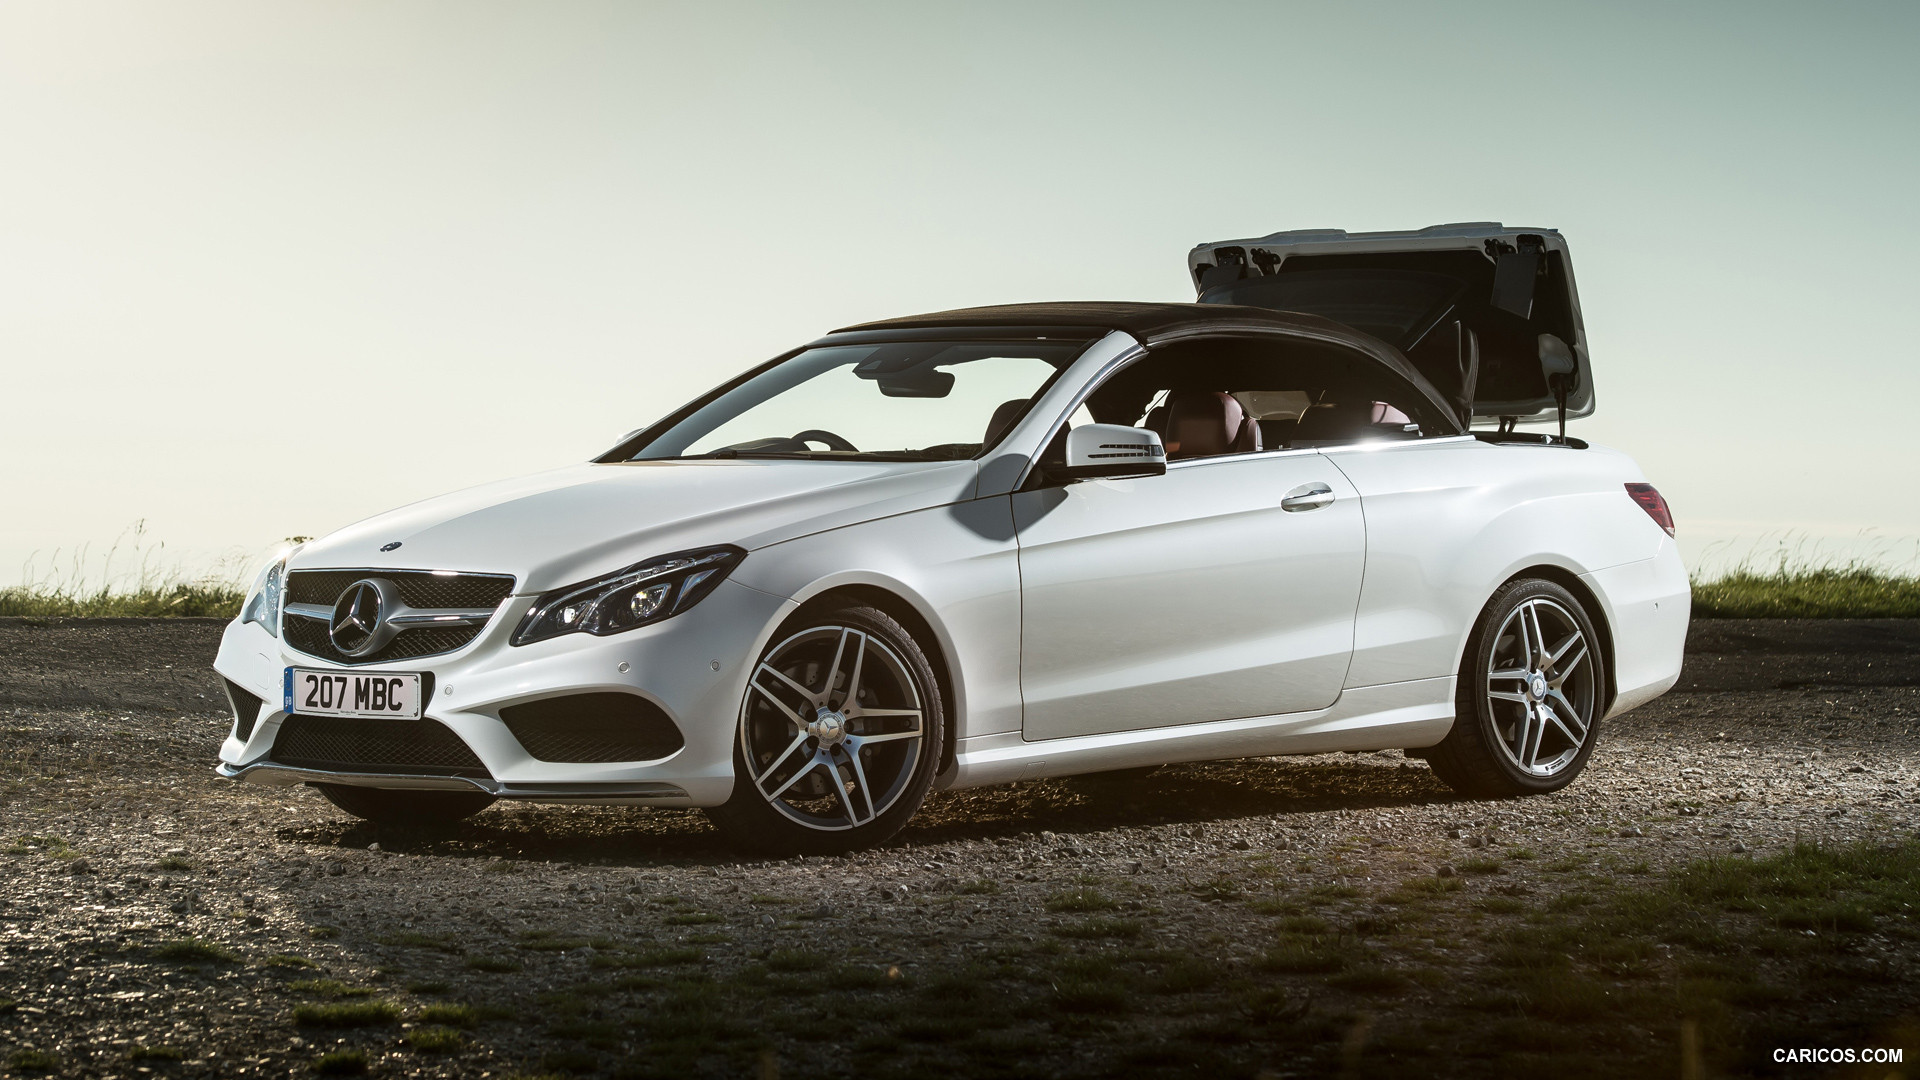 2014 Mercedes-Benz E-Class Cabriolet (UK-Version) - Top In Action - Side, #11 of 15